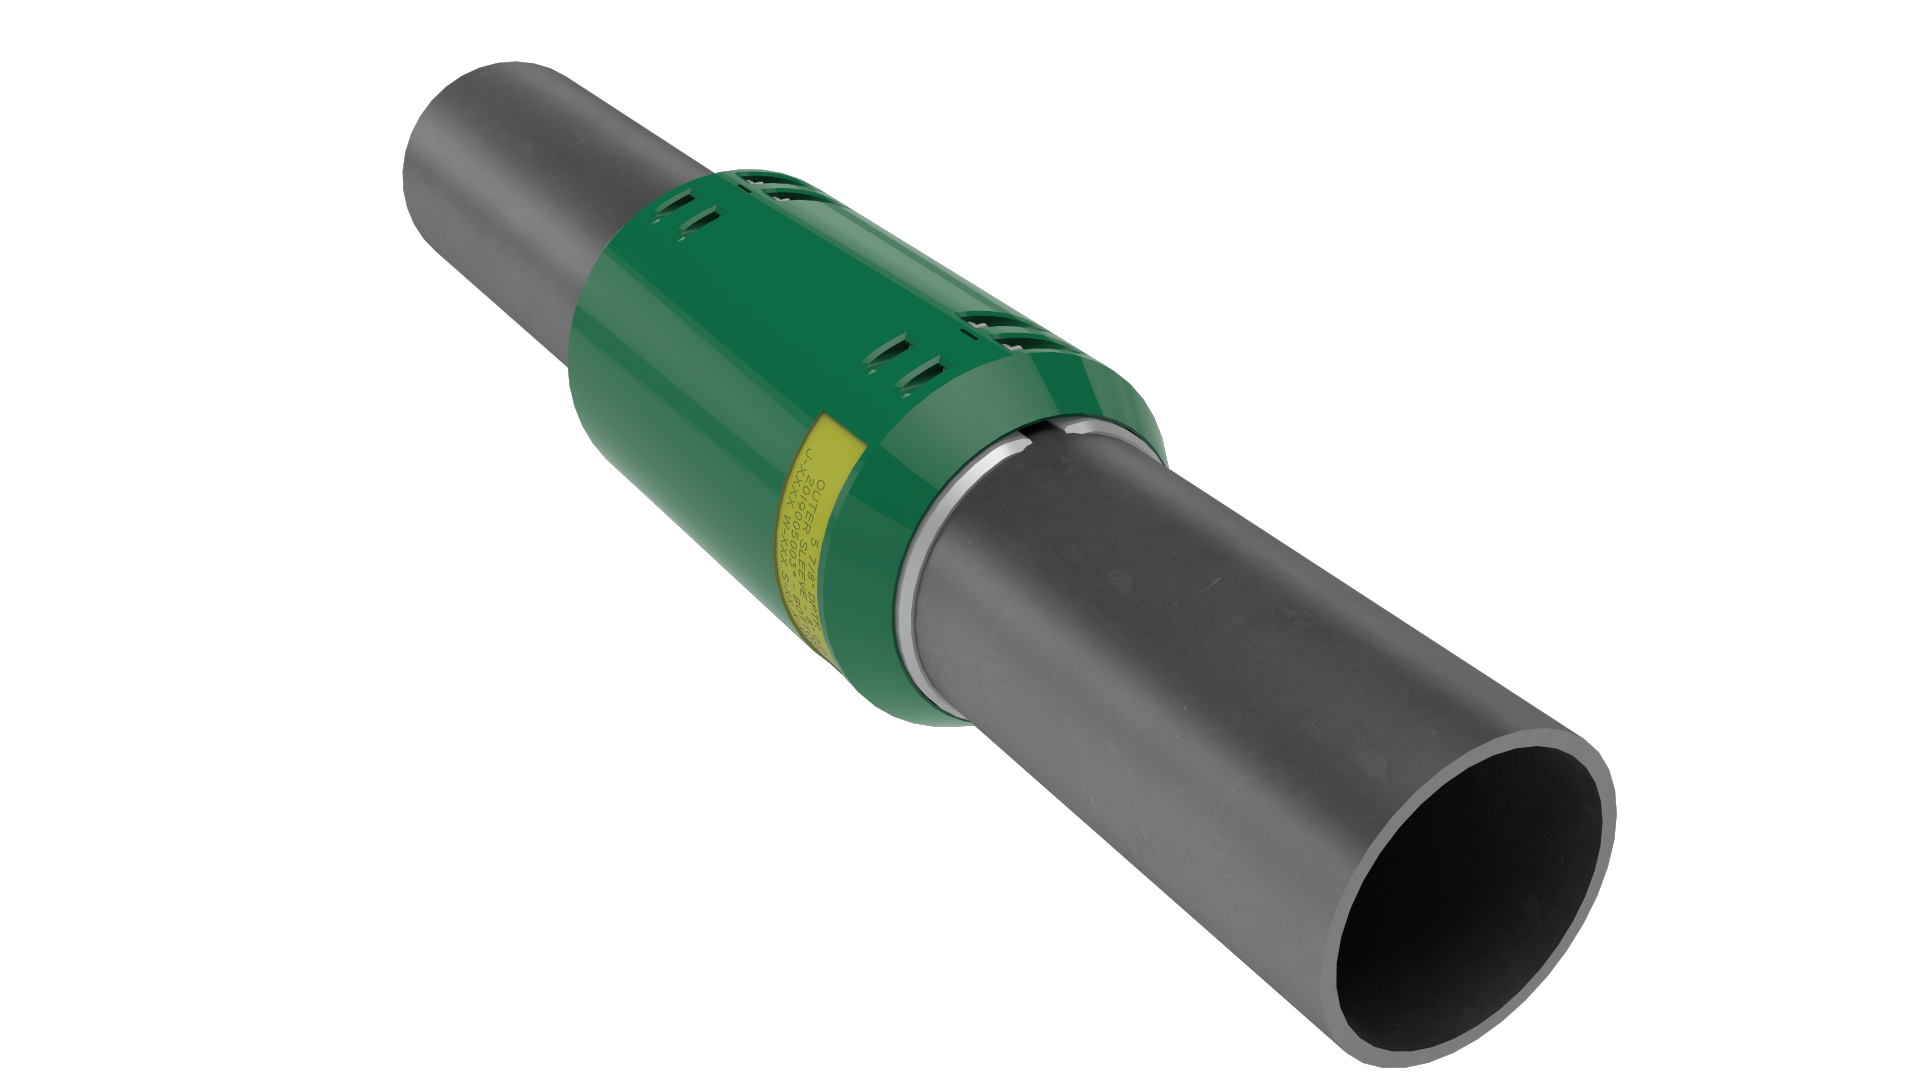 The DPTR tool limits casing and drillstring wear and reduces torque. (Source: Frank’s International)